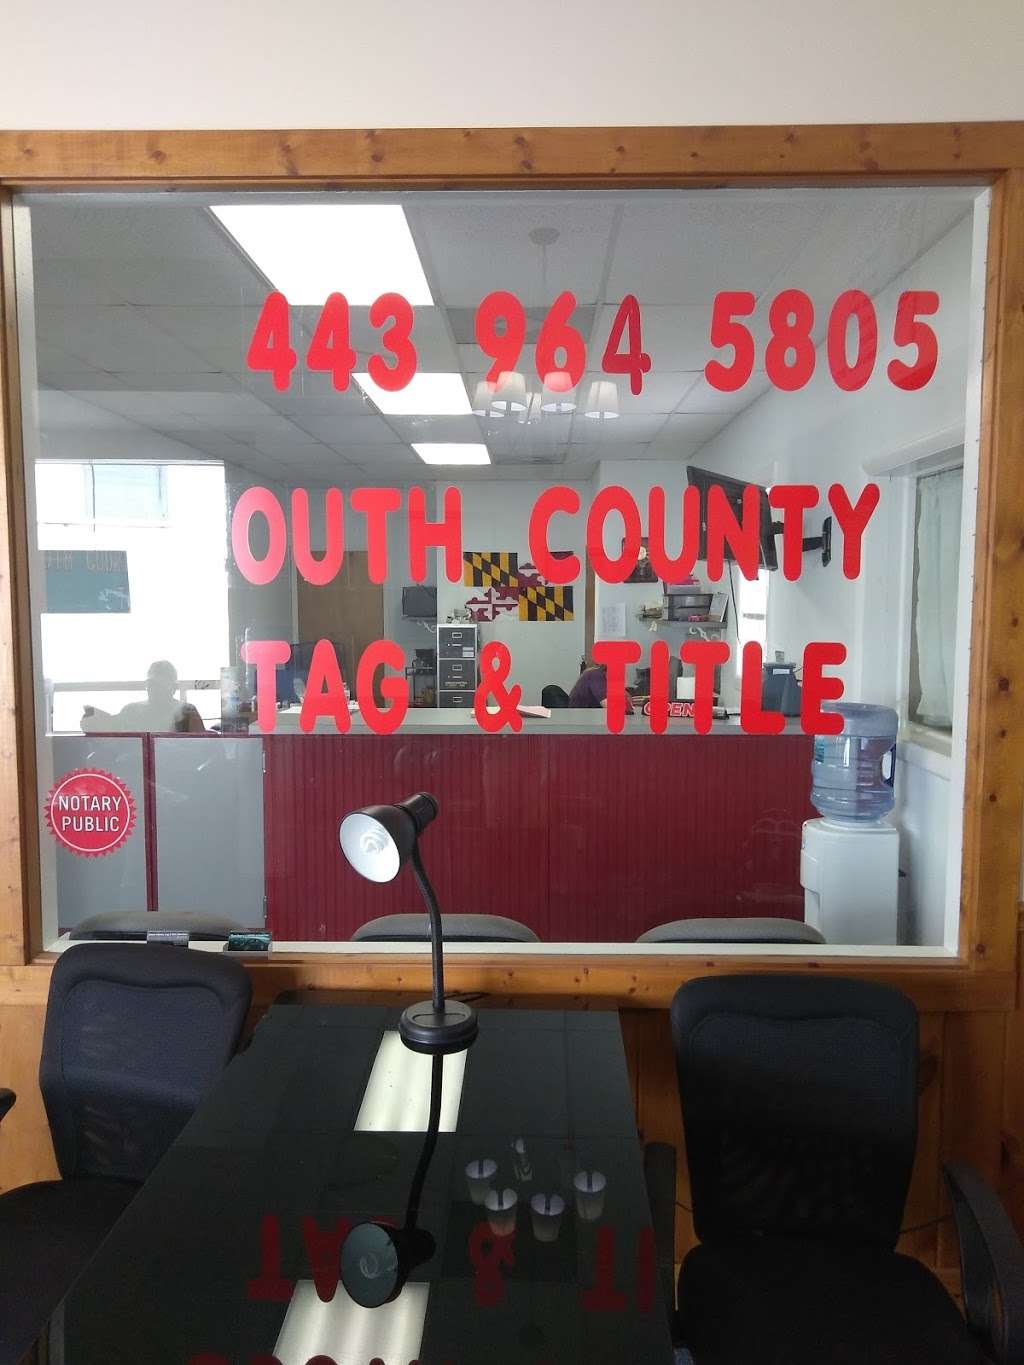 South County tag and title service | 167 Thomas Ave, Owings, MD 20736 | Phone: (443) 964-5805